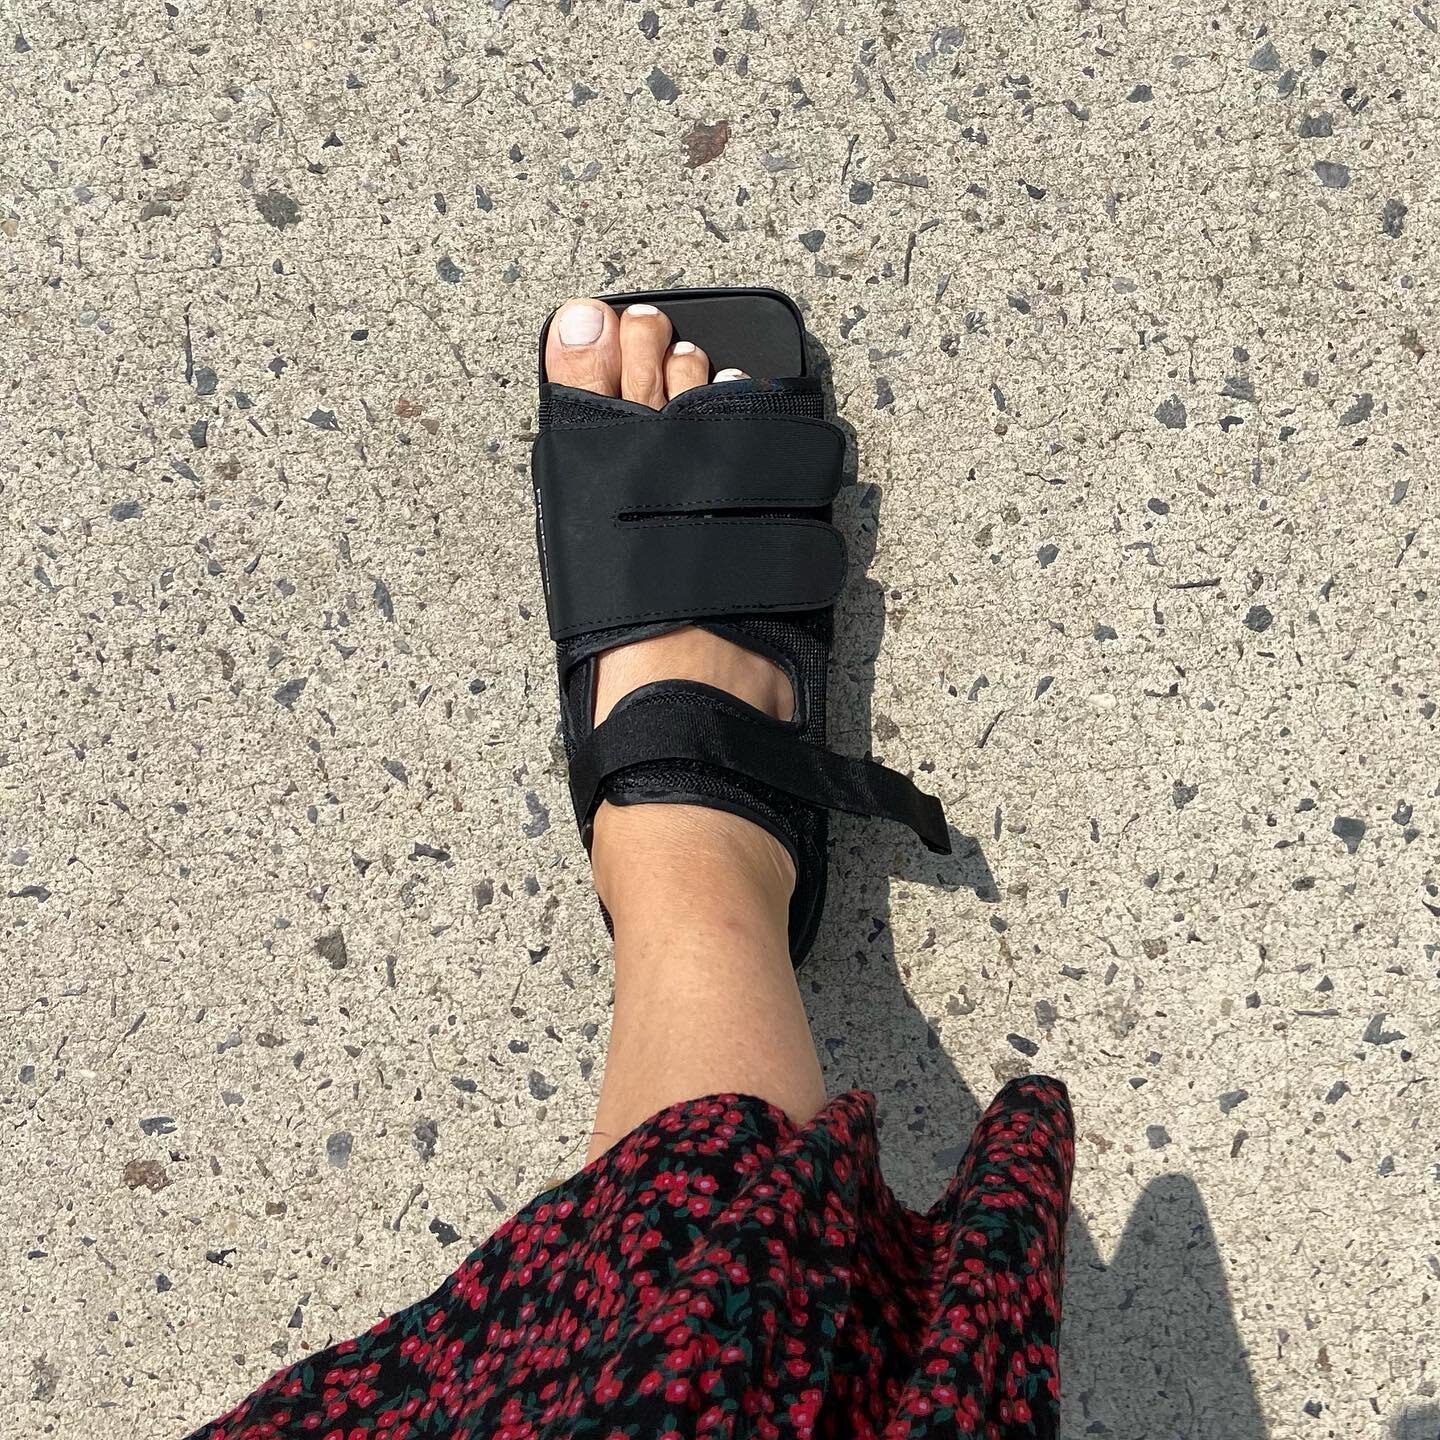 I like an ugly sandal but this is too much. Most annoying thing about the whole fractured toe *because I walked into a piece of furniture that&rsquo;s been in the same spot for 3 years* situation is that I&rsquo;m not sure I can use the pedal on my s